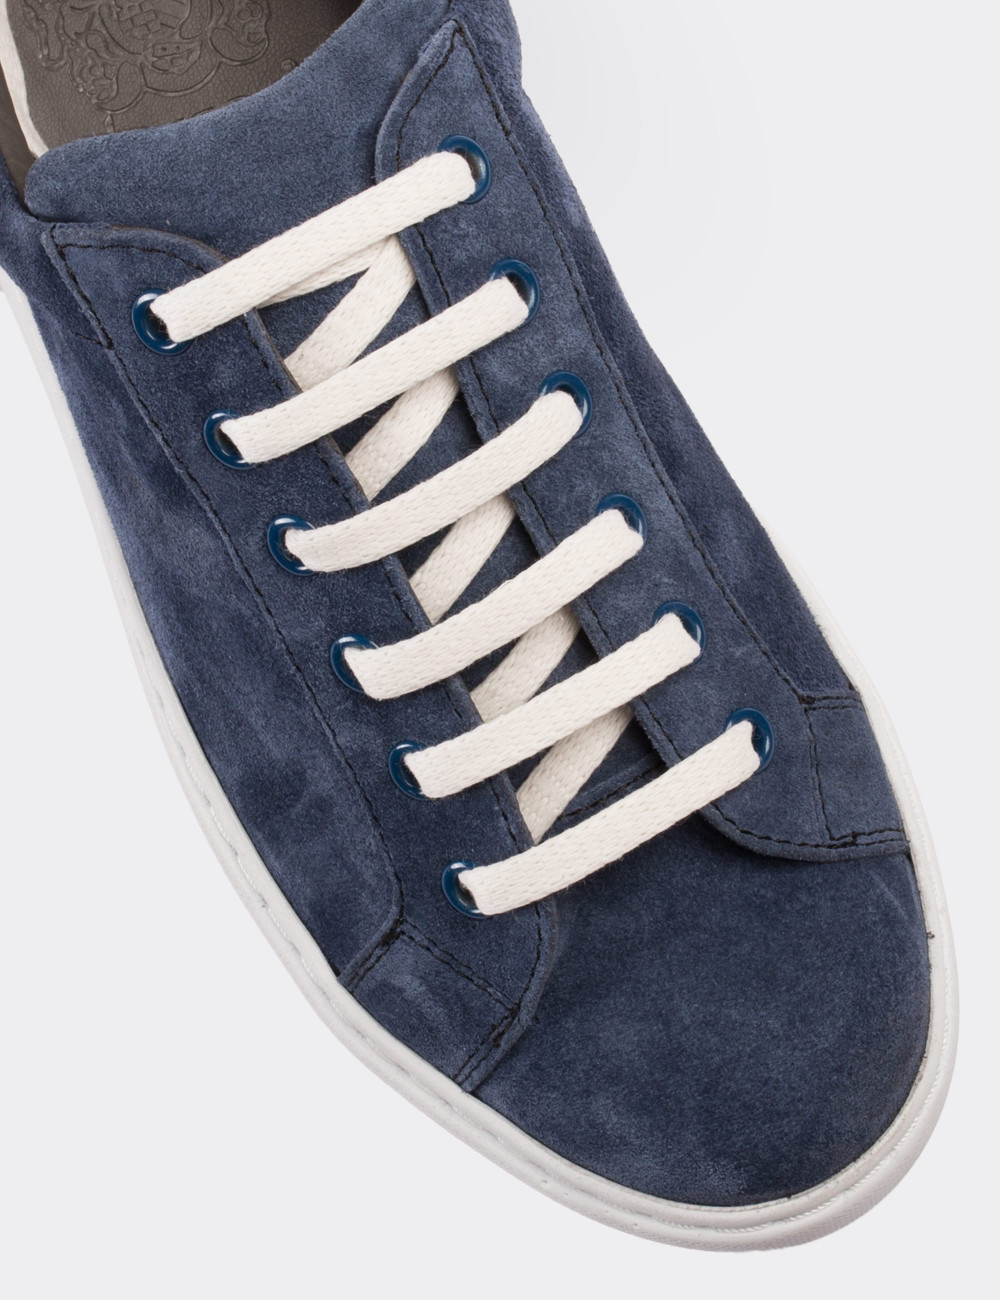 Navy Suede Leather Sneakers - 01698ZLCVP01